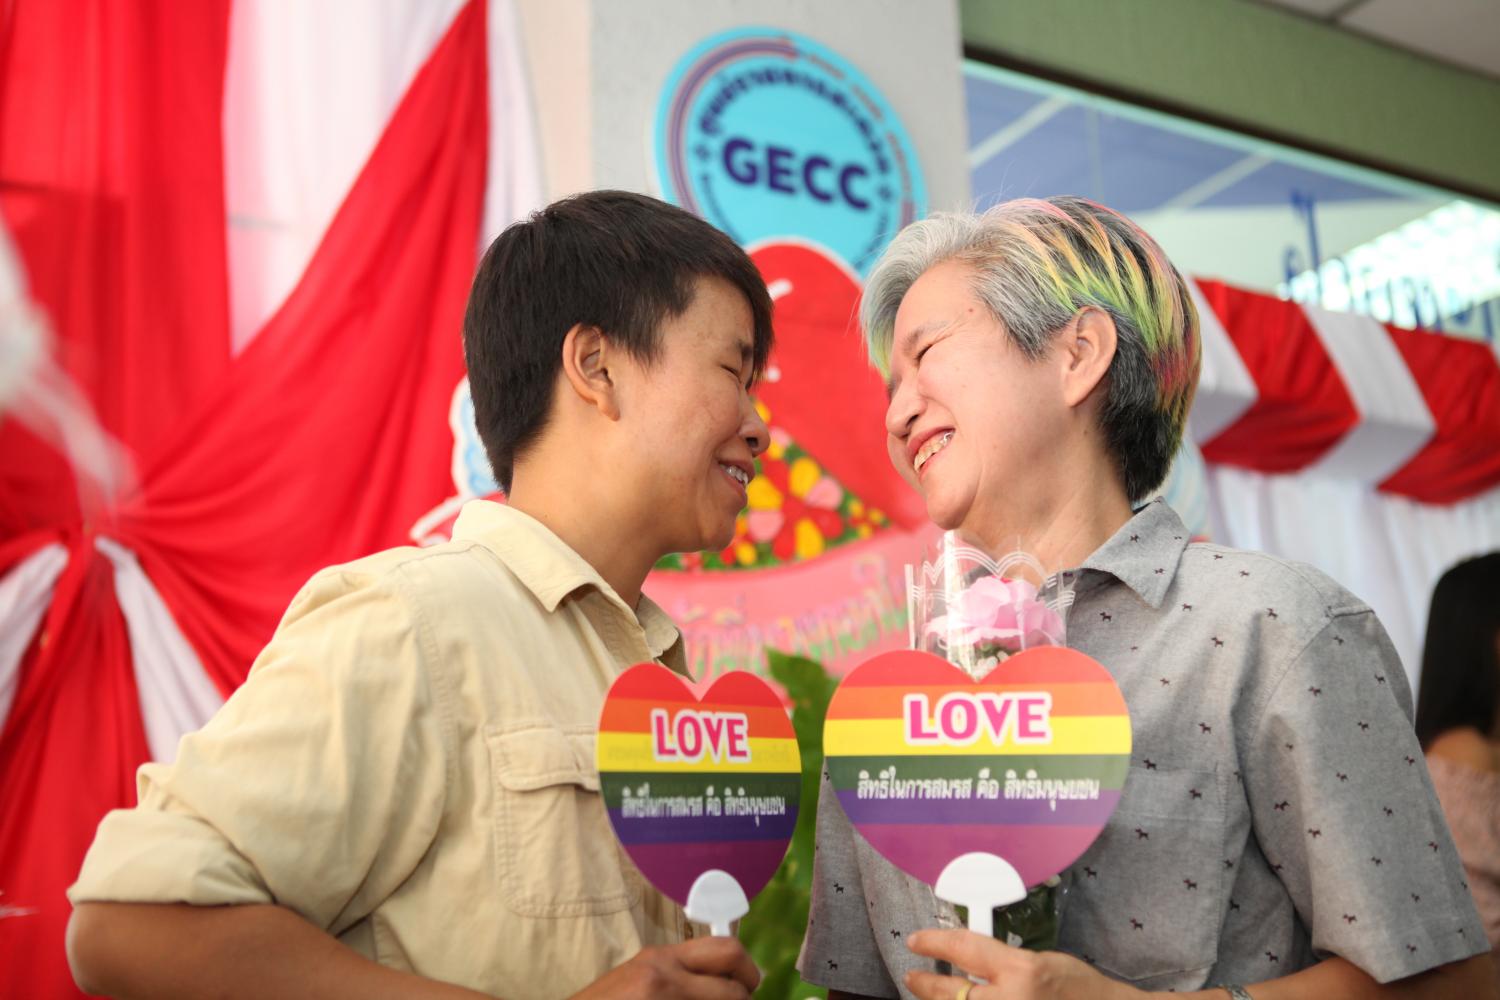 Thailand's Conservative Majority Uneasy Over Granting Rights to LGBTQ Citizens